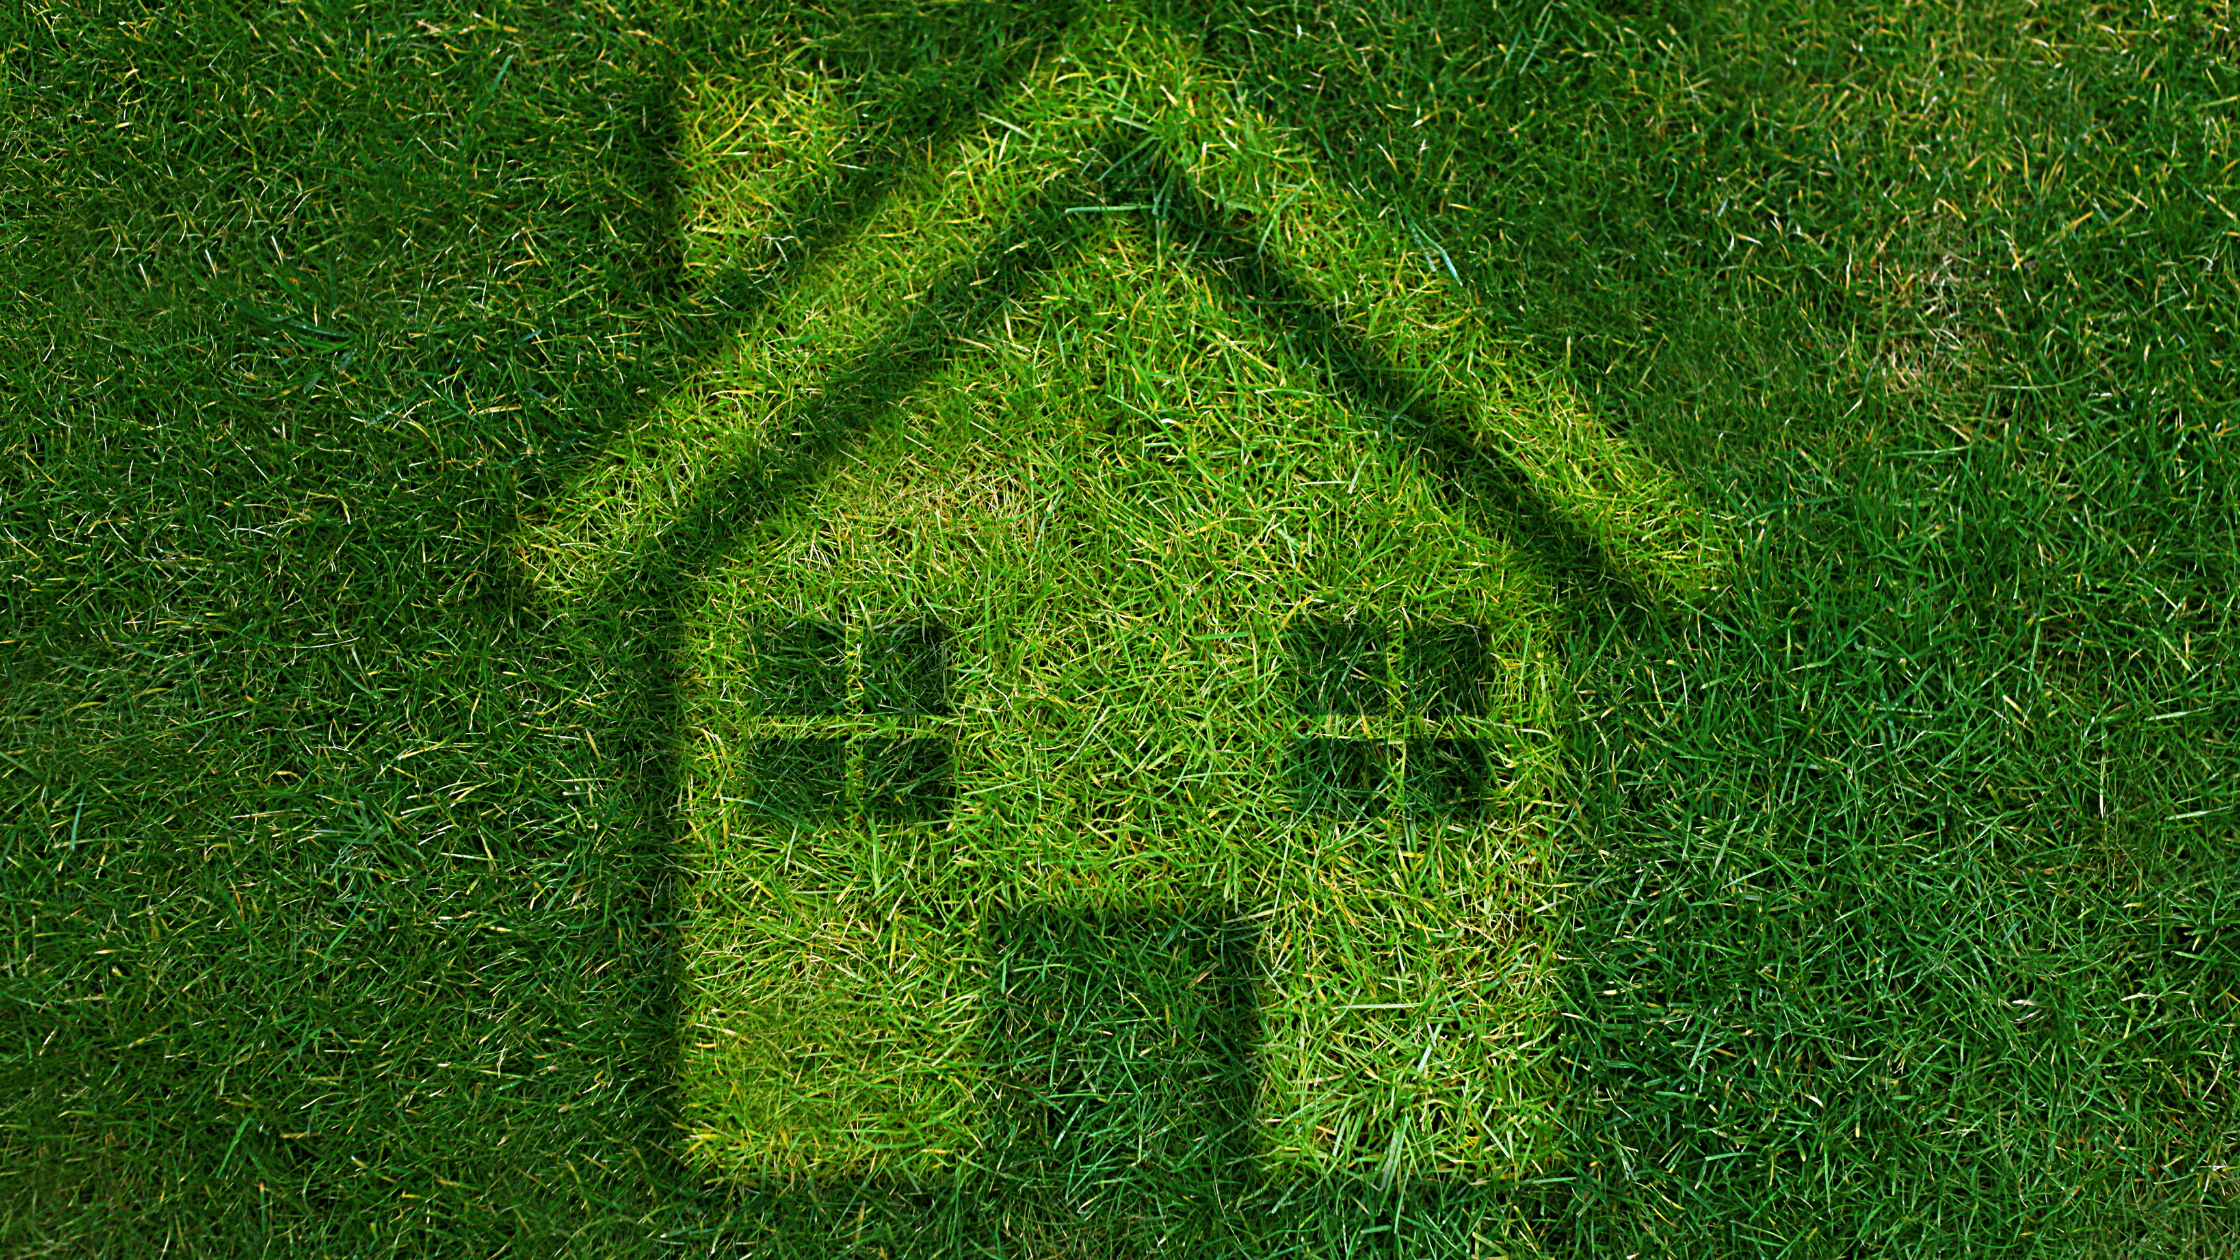 Don’t miss out on the Government’s Green Homes Grant!